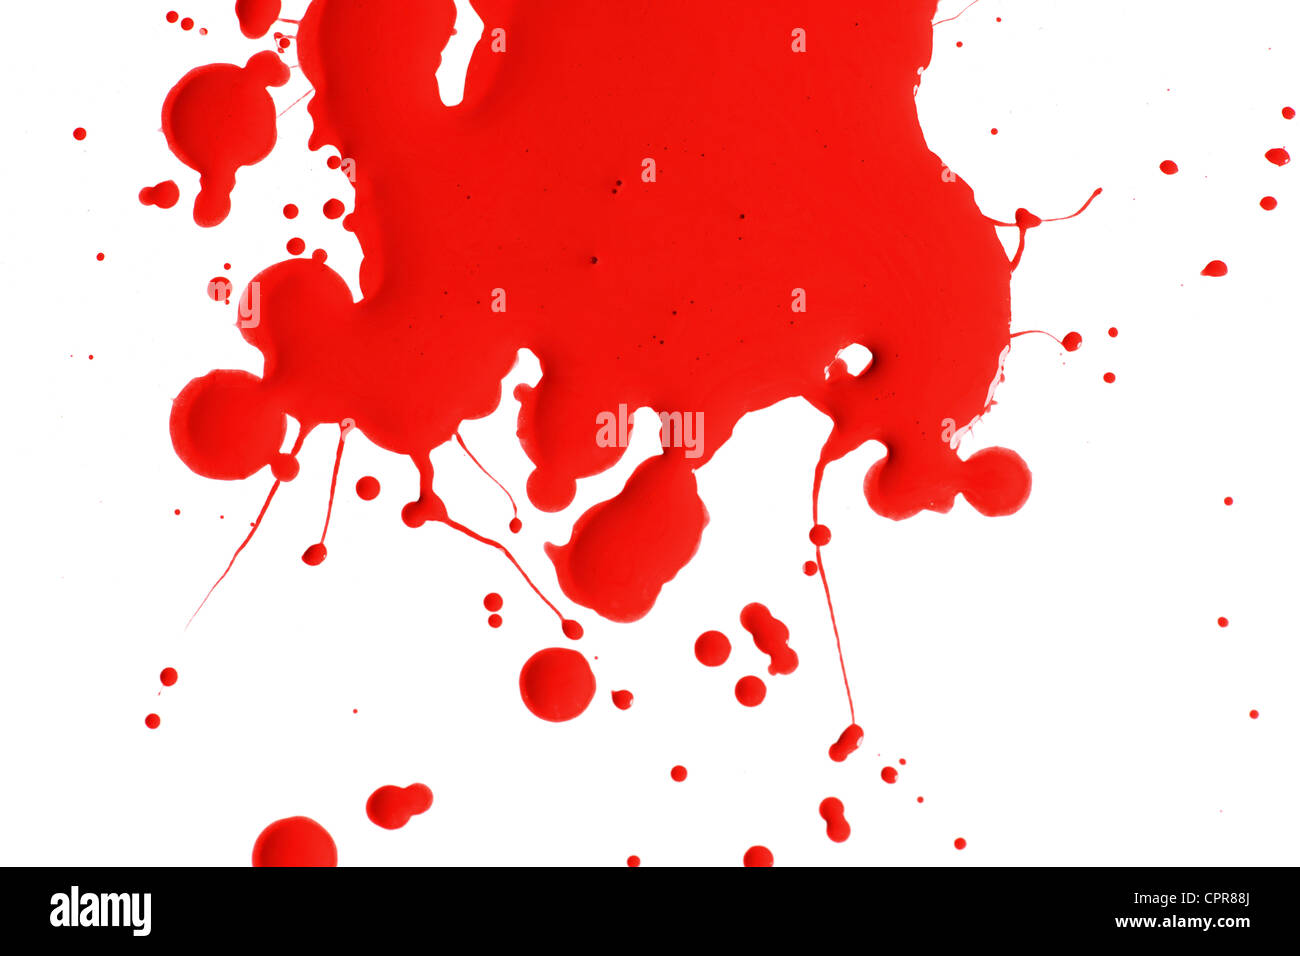 Splash of red paint isolated over white background Stock Photo